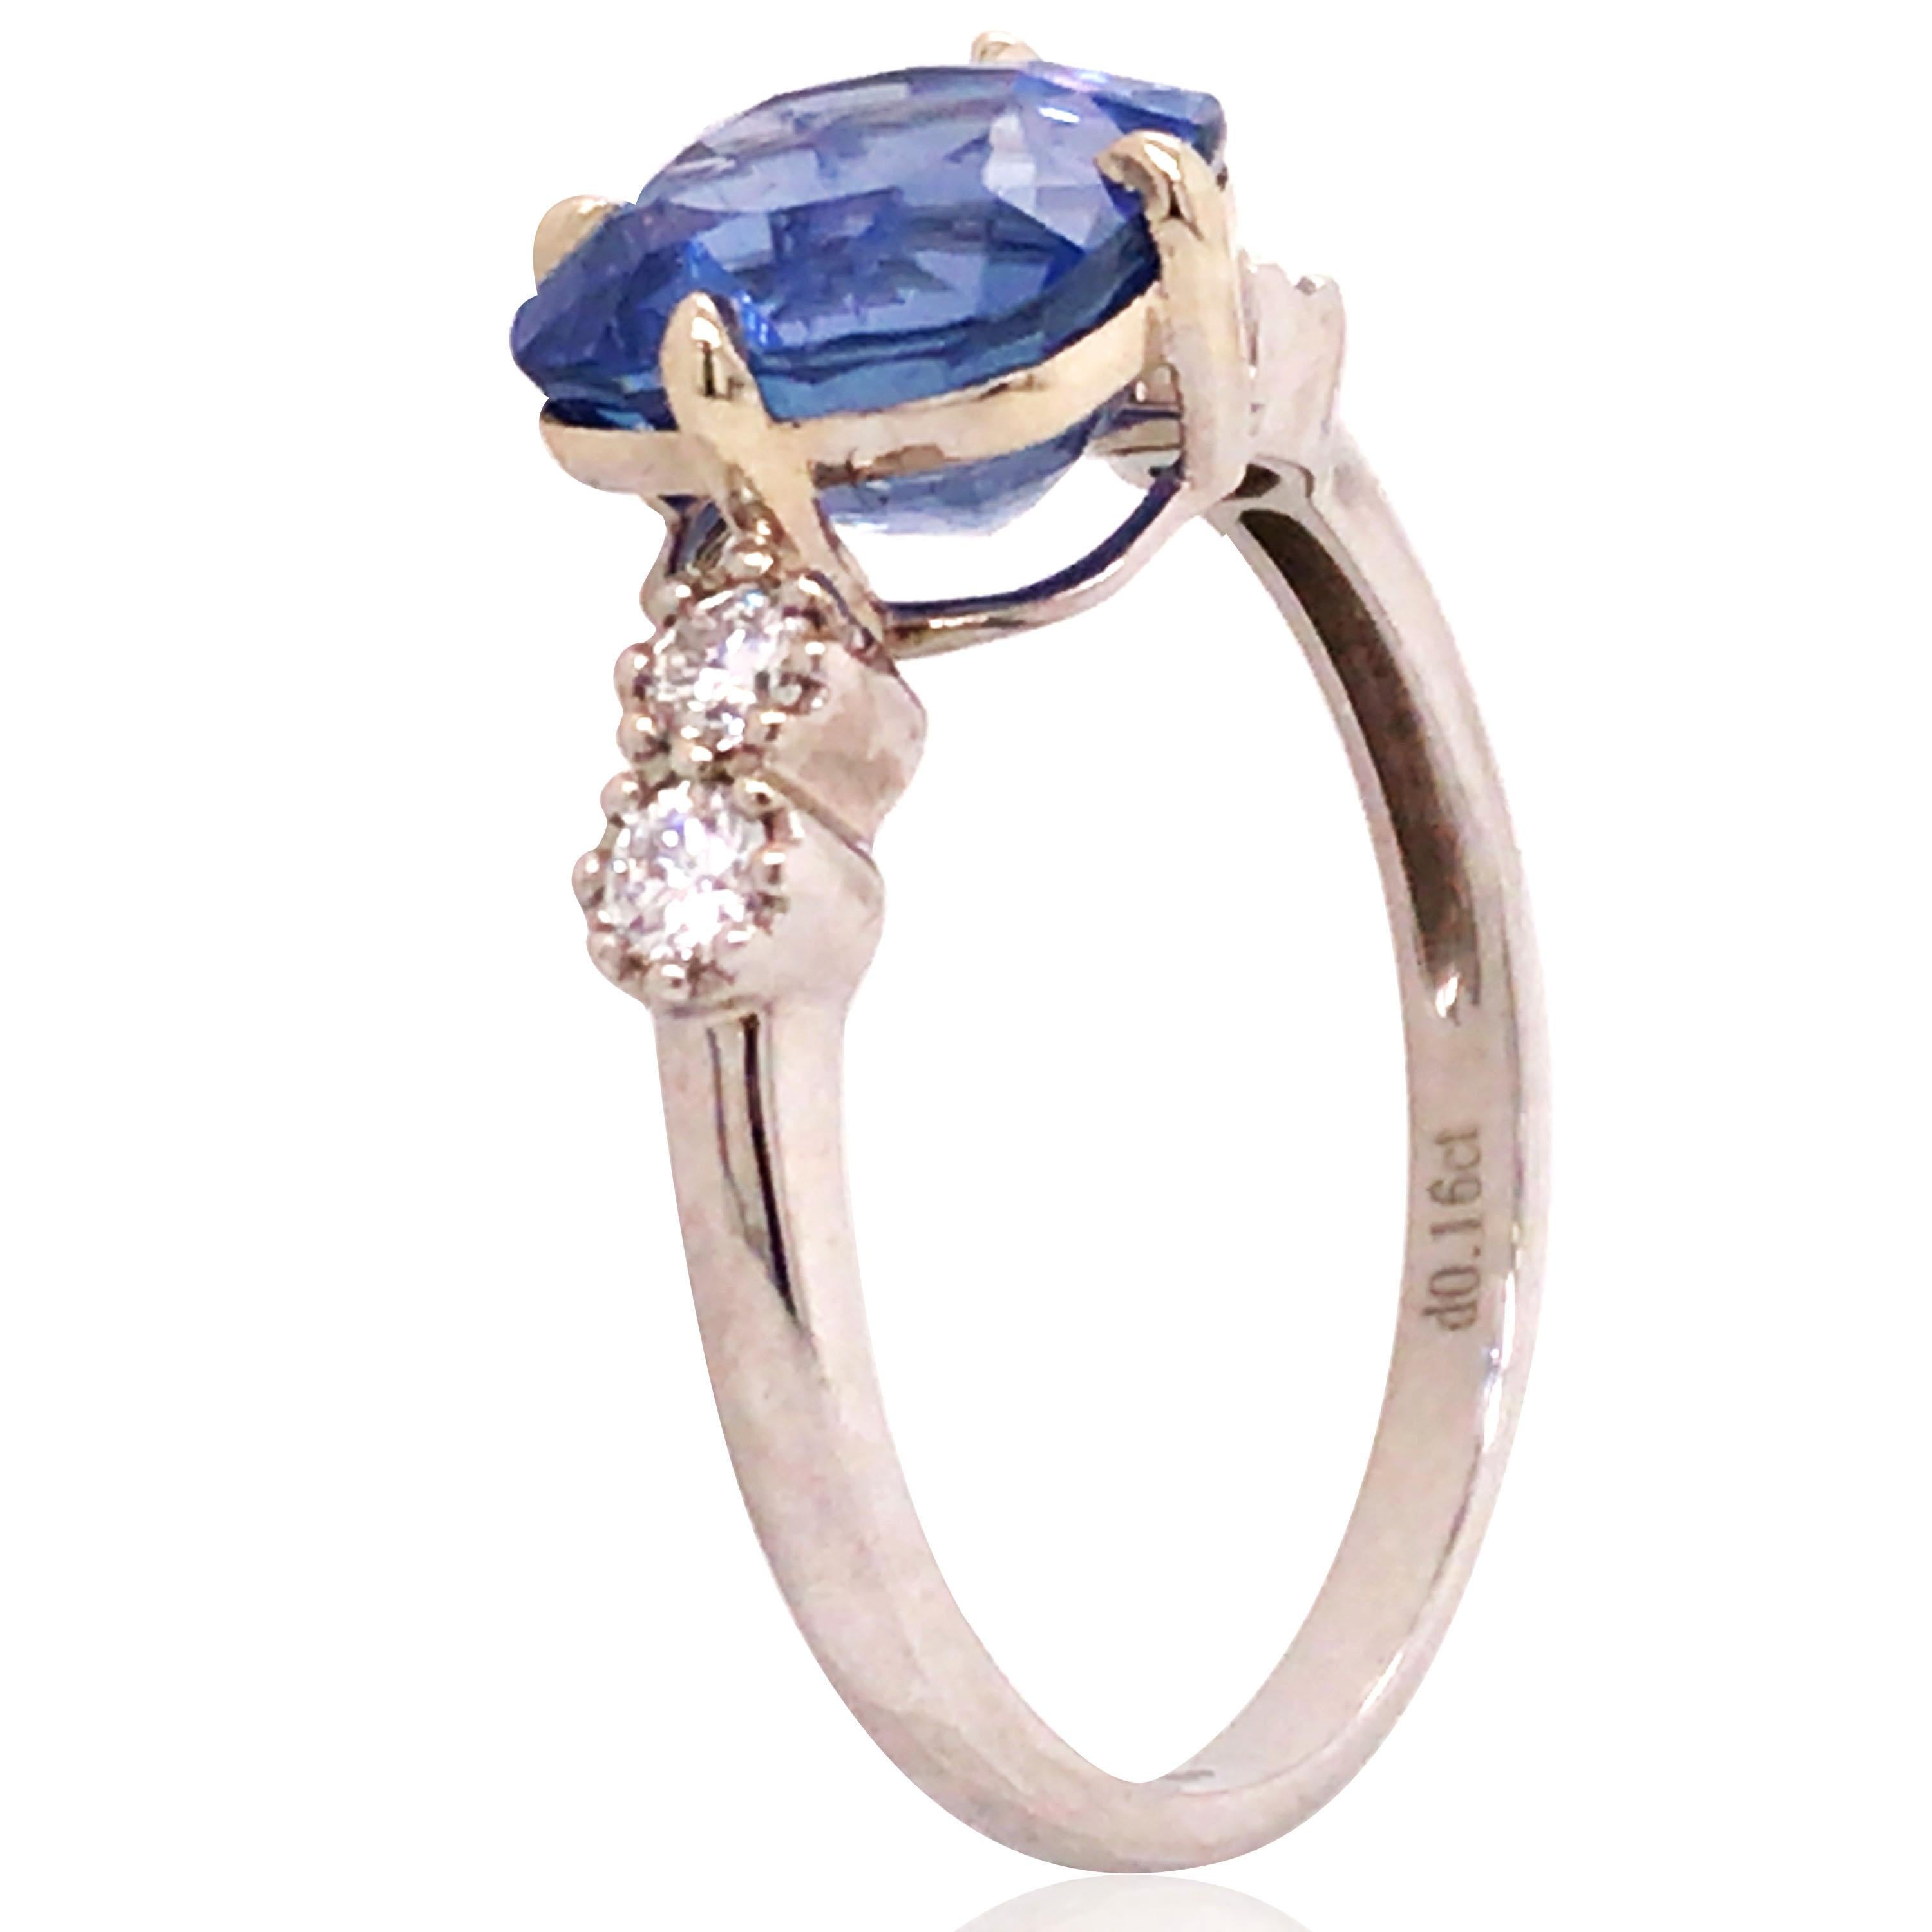 Cushion-shaped sapphire weighs 3.24ct, accompanied by a Gubelin report stating the sapphire is of Burma origin with no indication of heating. 4 round diamonds total approx. 0.16ct. Ring size: 5.75. 

Weight: 1.7 grams